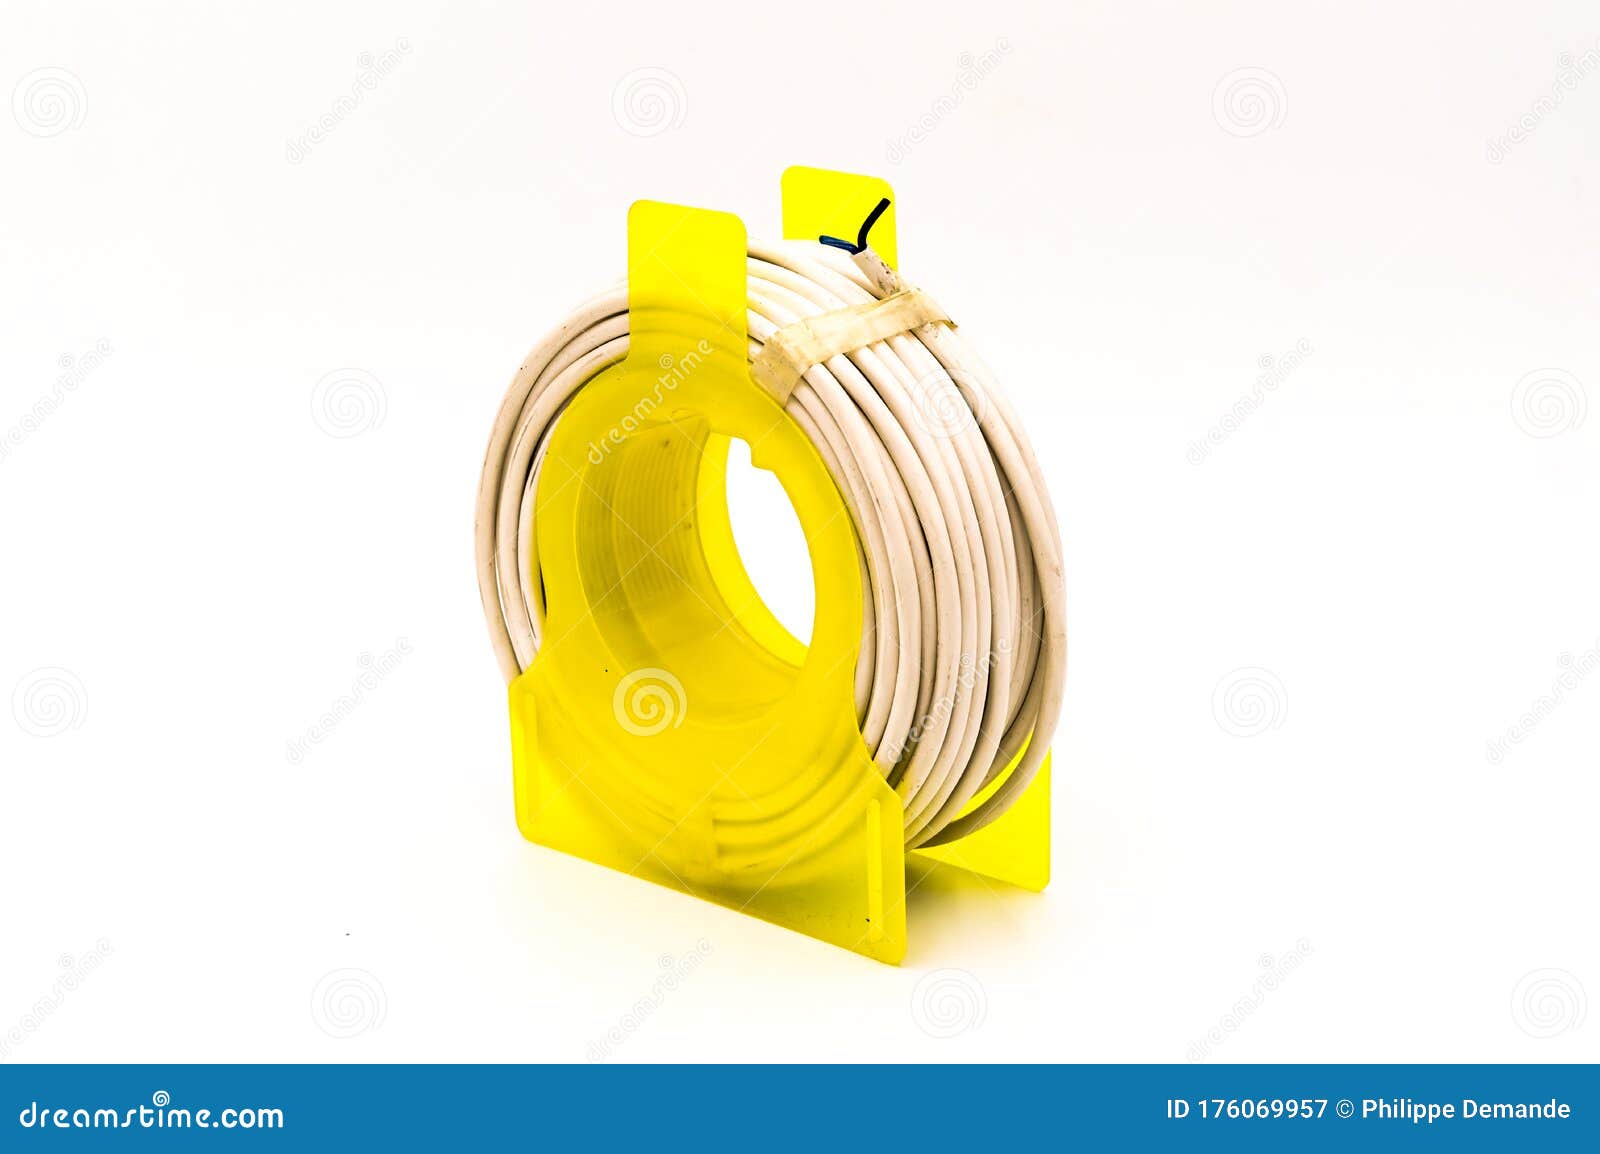 Small Cable Reel Drum Isolated Stock Image - Image of heating, power:  176069957